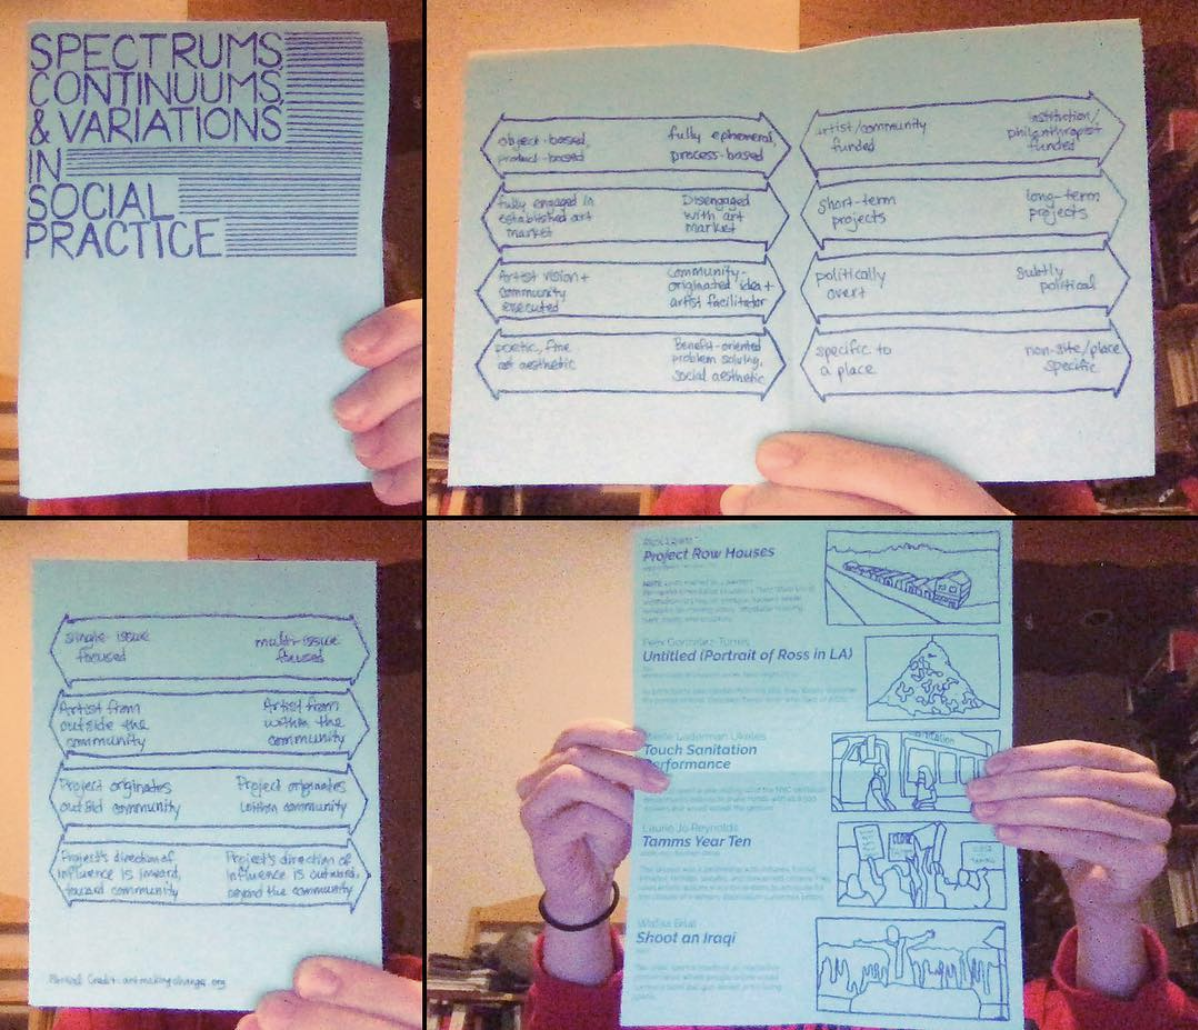 Spectrums, Continuums, and Variations in Social Practice Zine